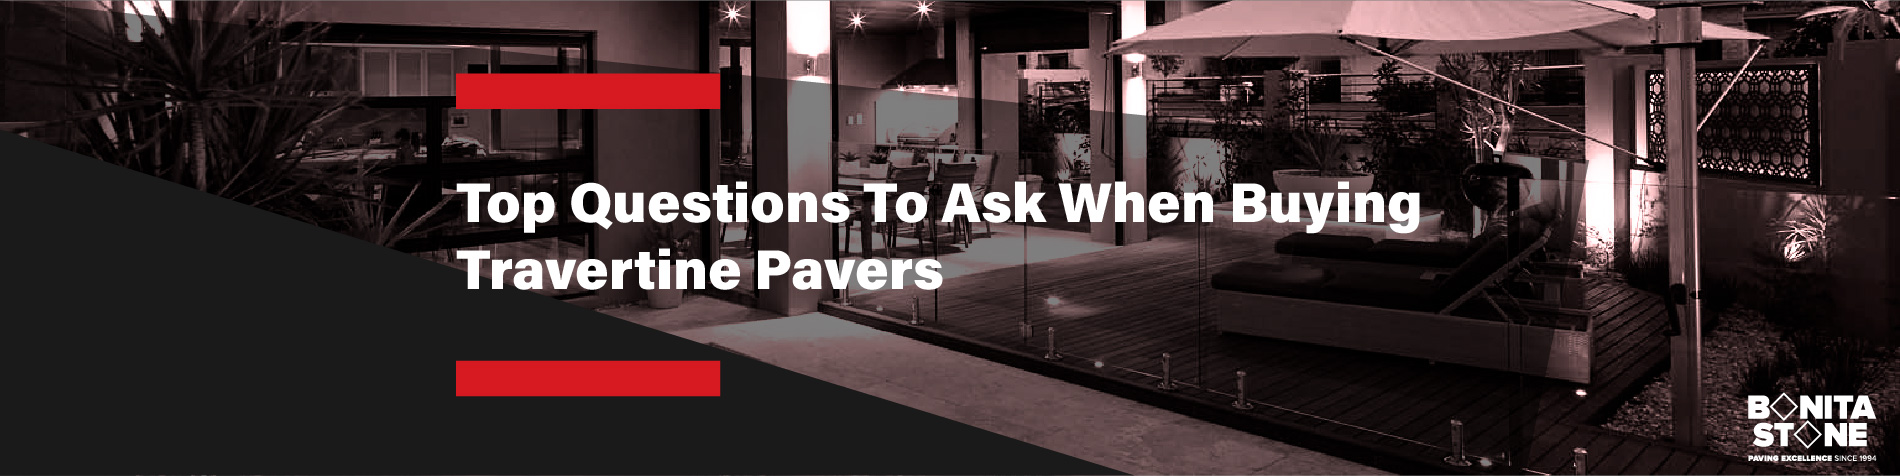 top-questions-to-ask-when-buying-travertine-pavers_1